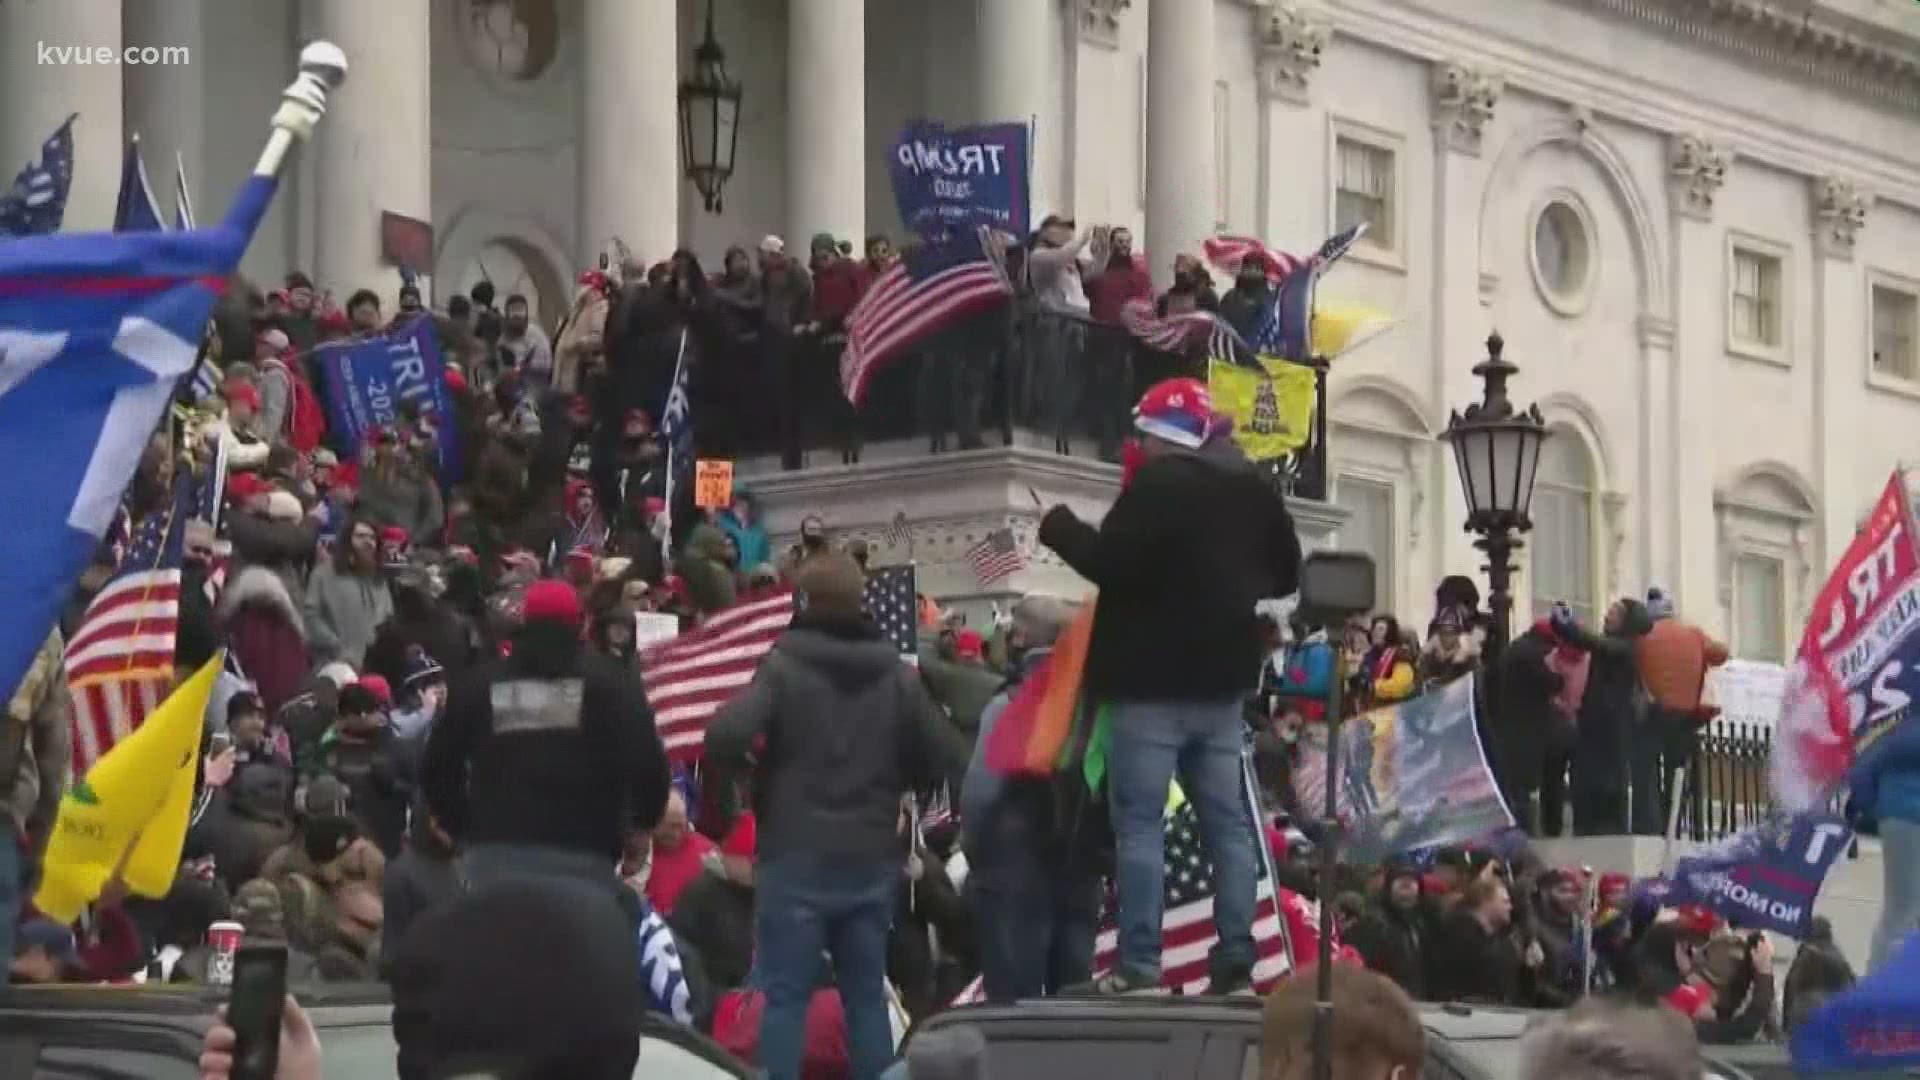 Supporters of President Donald Trump rioted at the U.S. Capitol Wednesday. Some local political experts are calling their actions "an attempted coup."